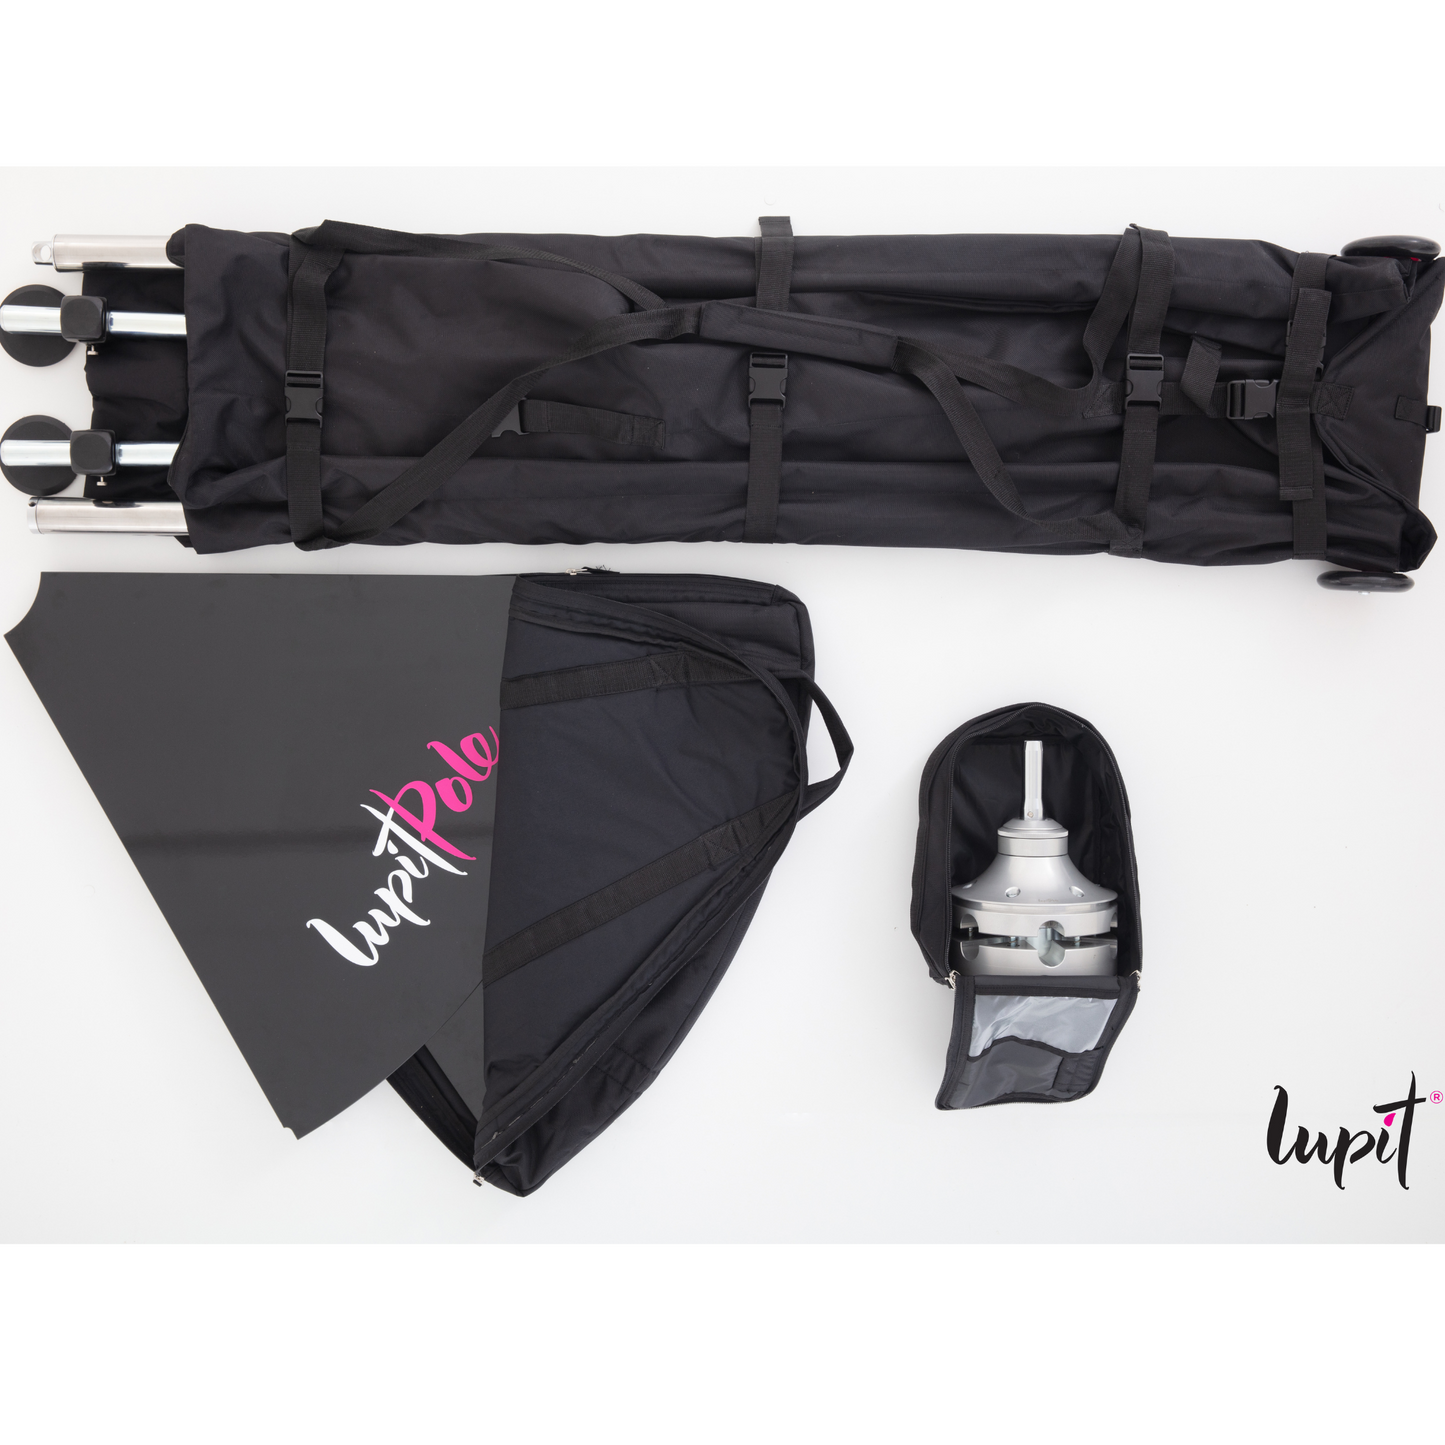 Lupit Pole Stage 3 Piece Carry Bag